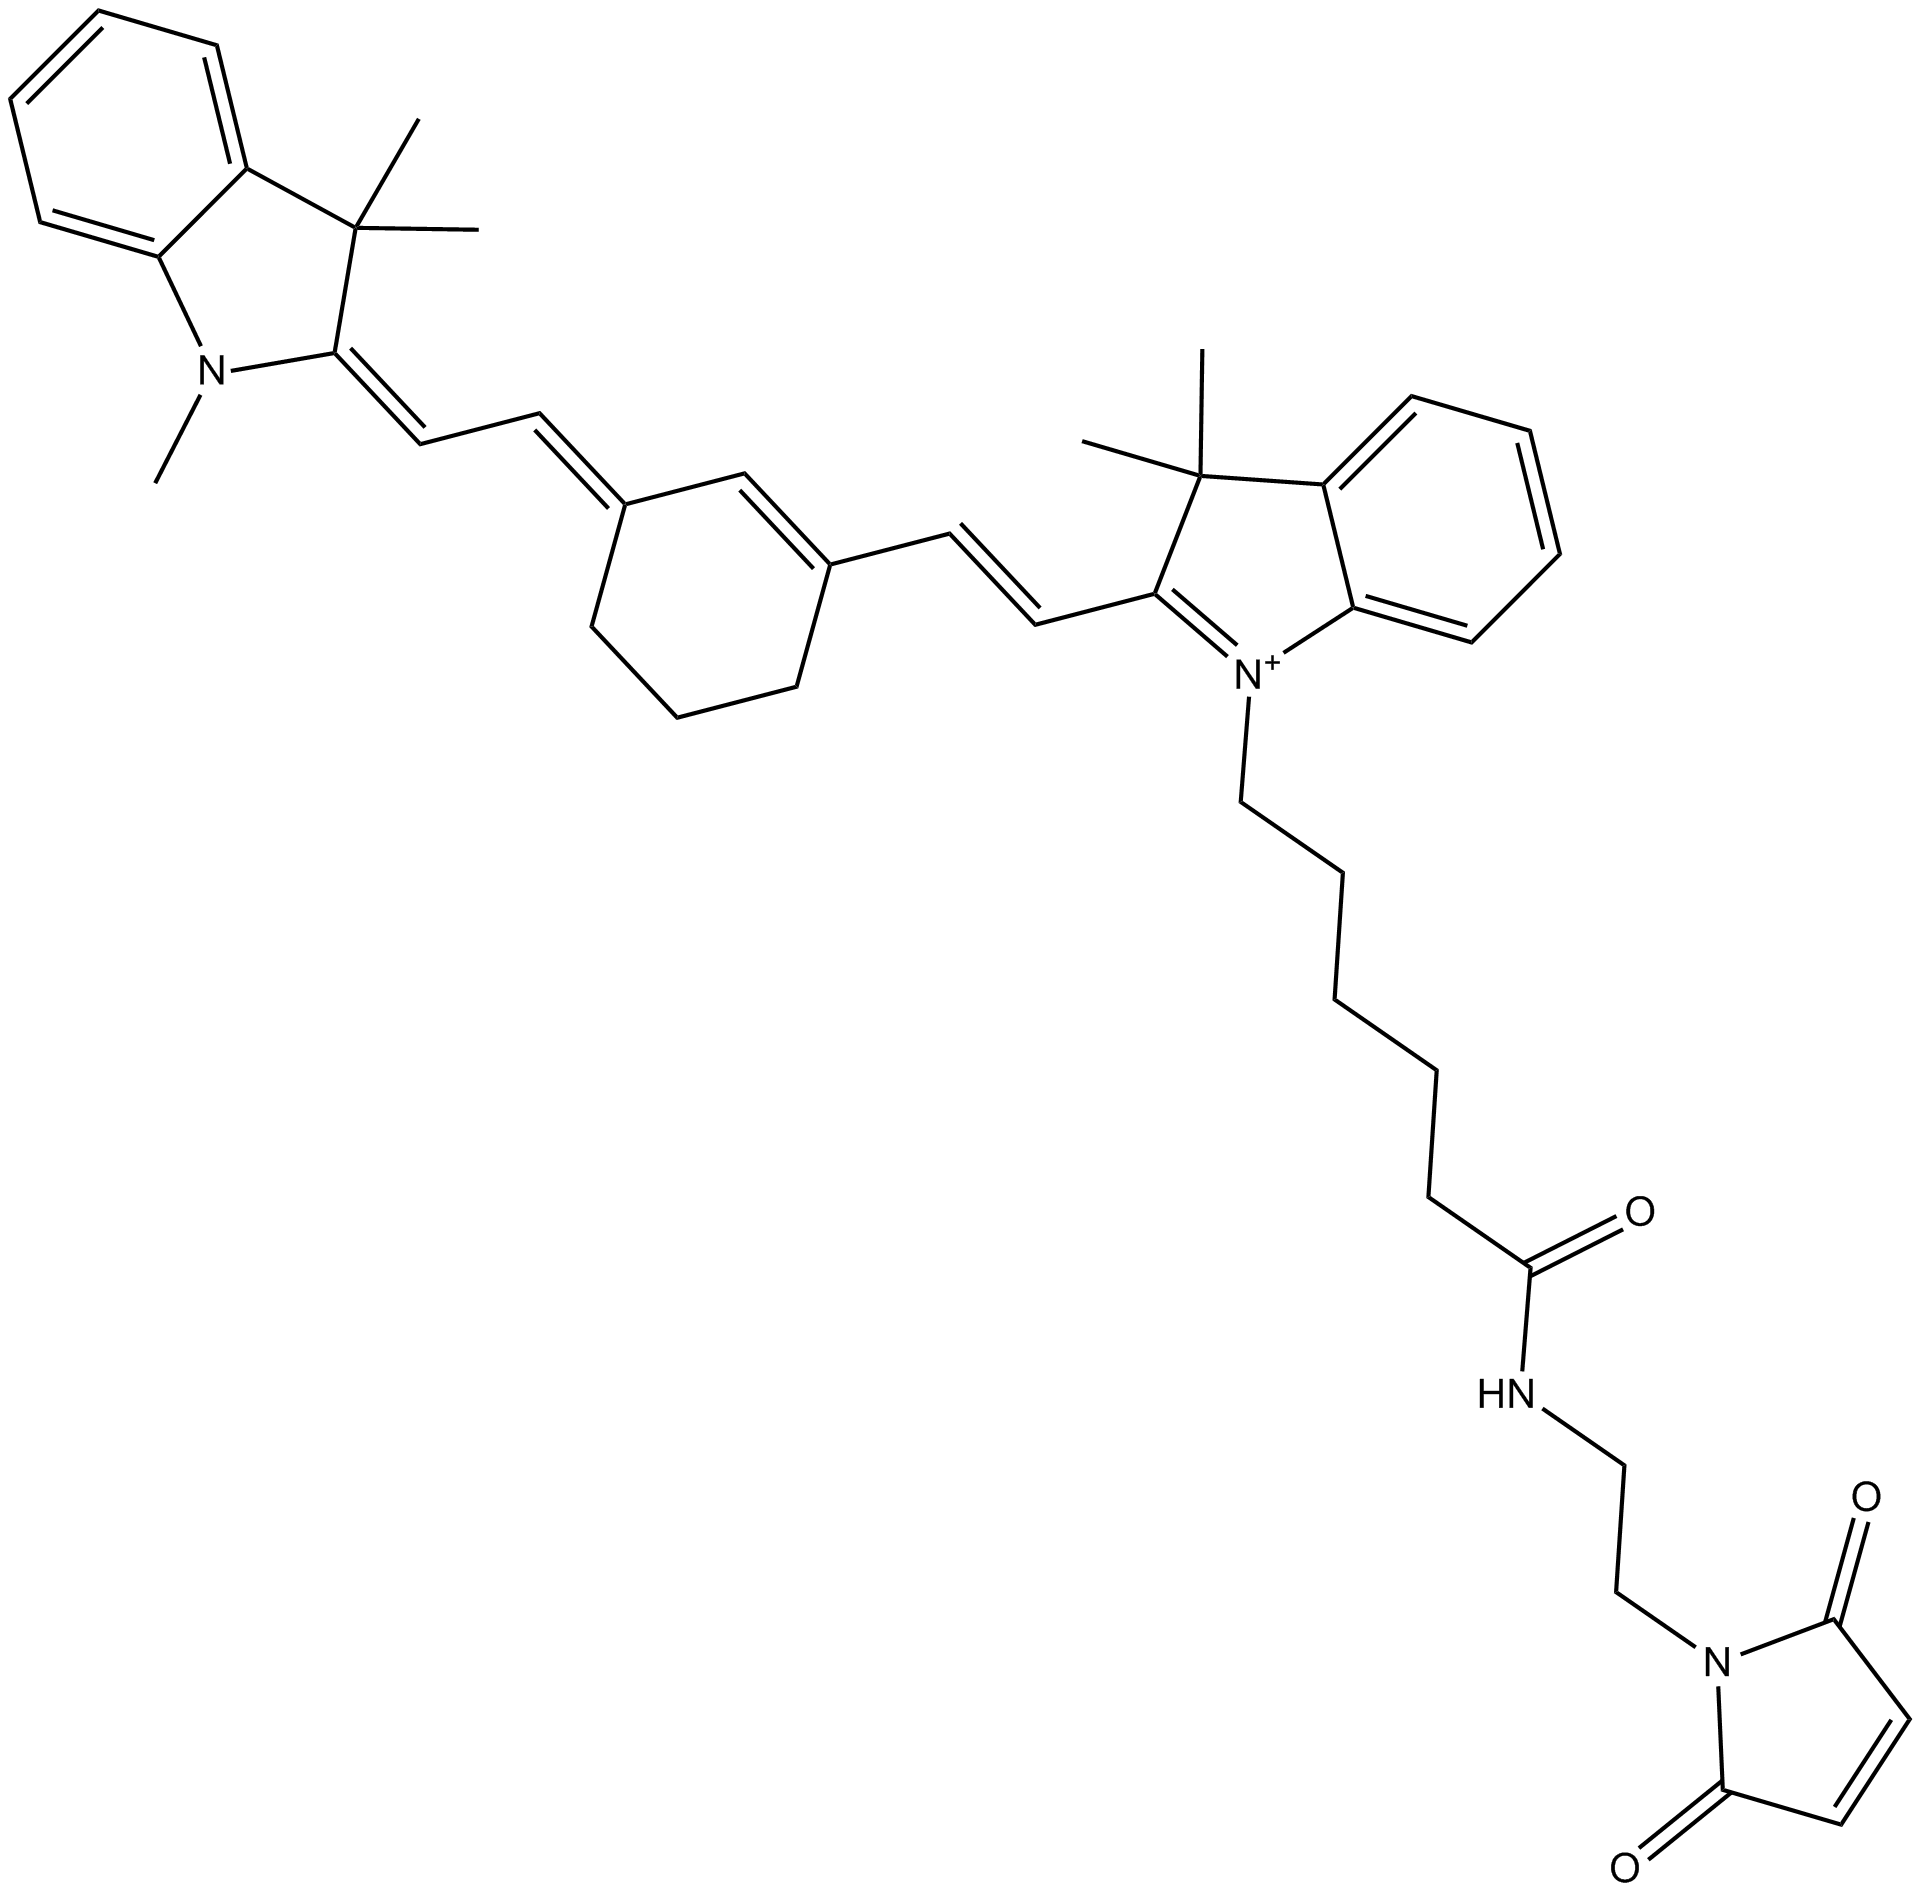 Cy7 maleimide (non-sulfonated) 化学構造